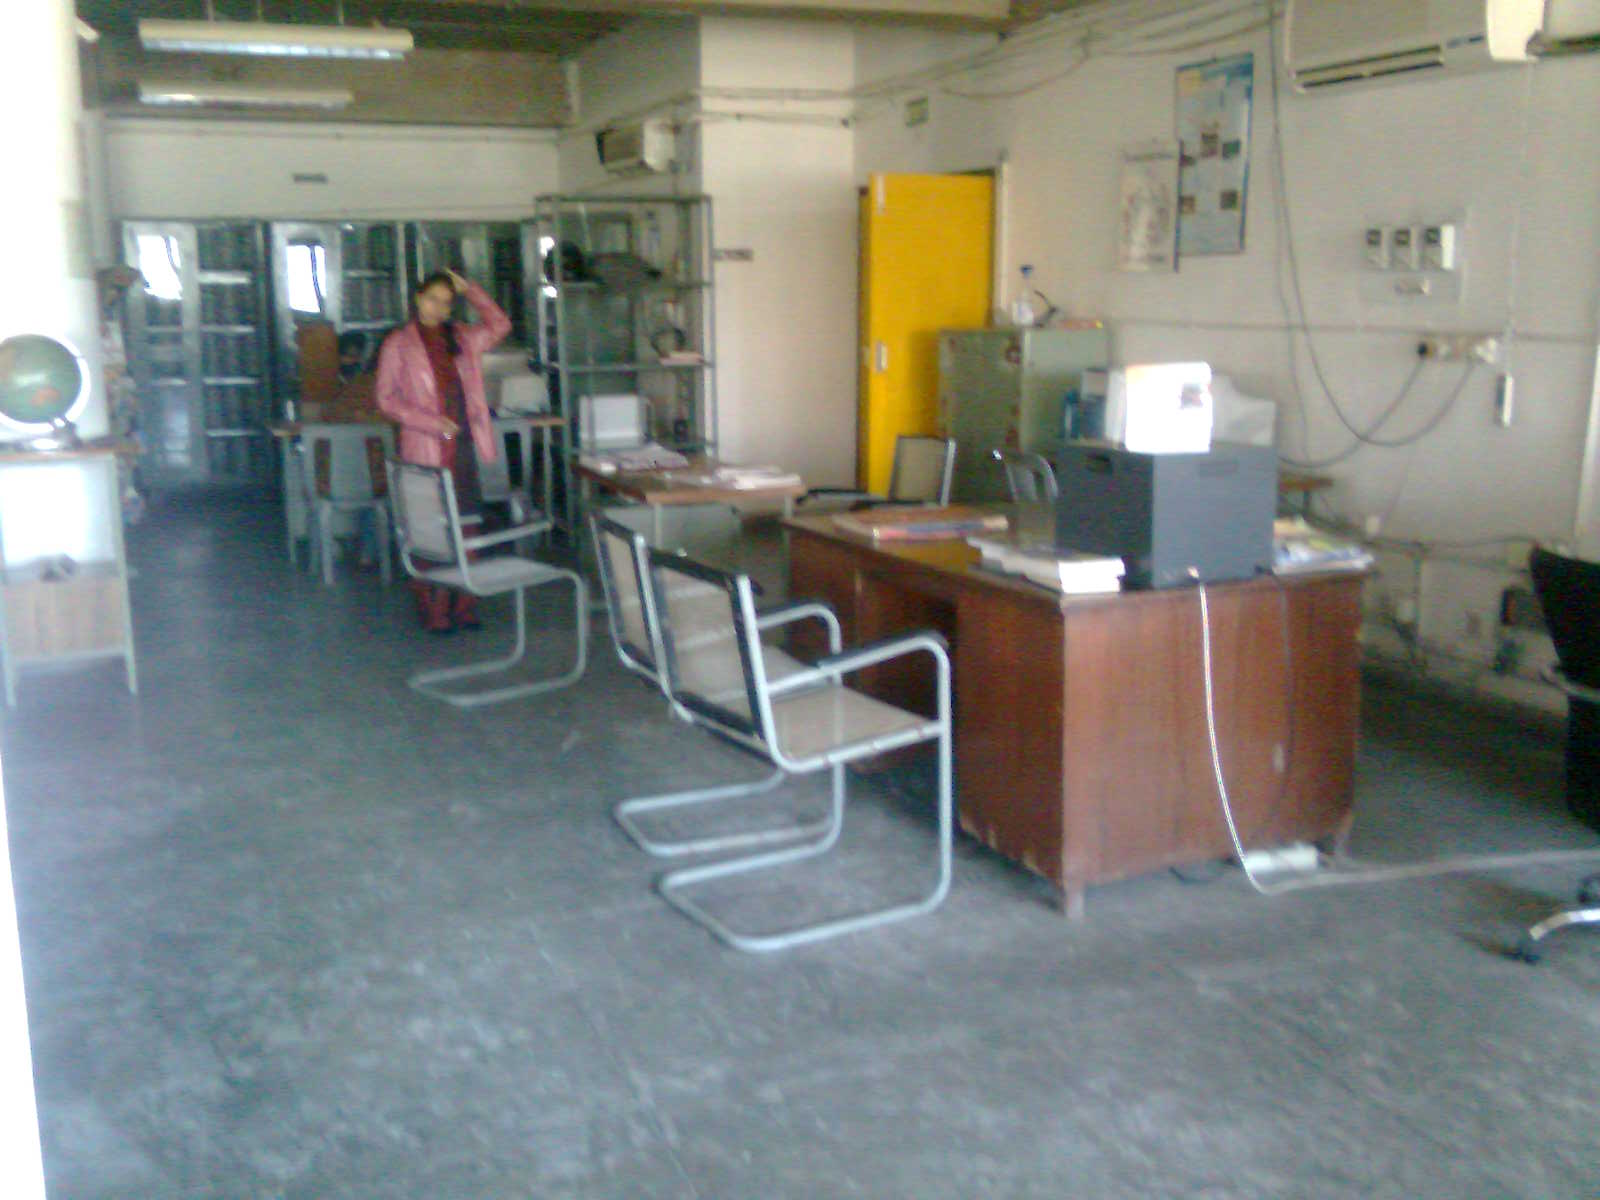 Circulation Section, State Library, Chandigarh